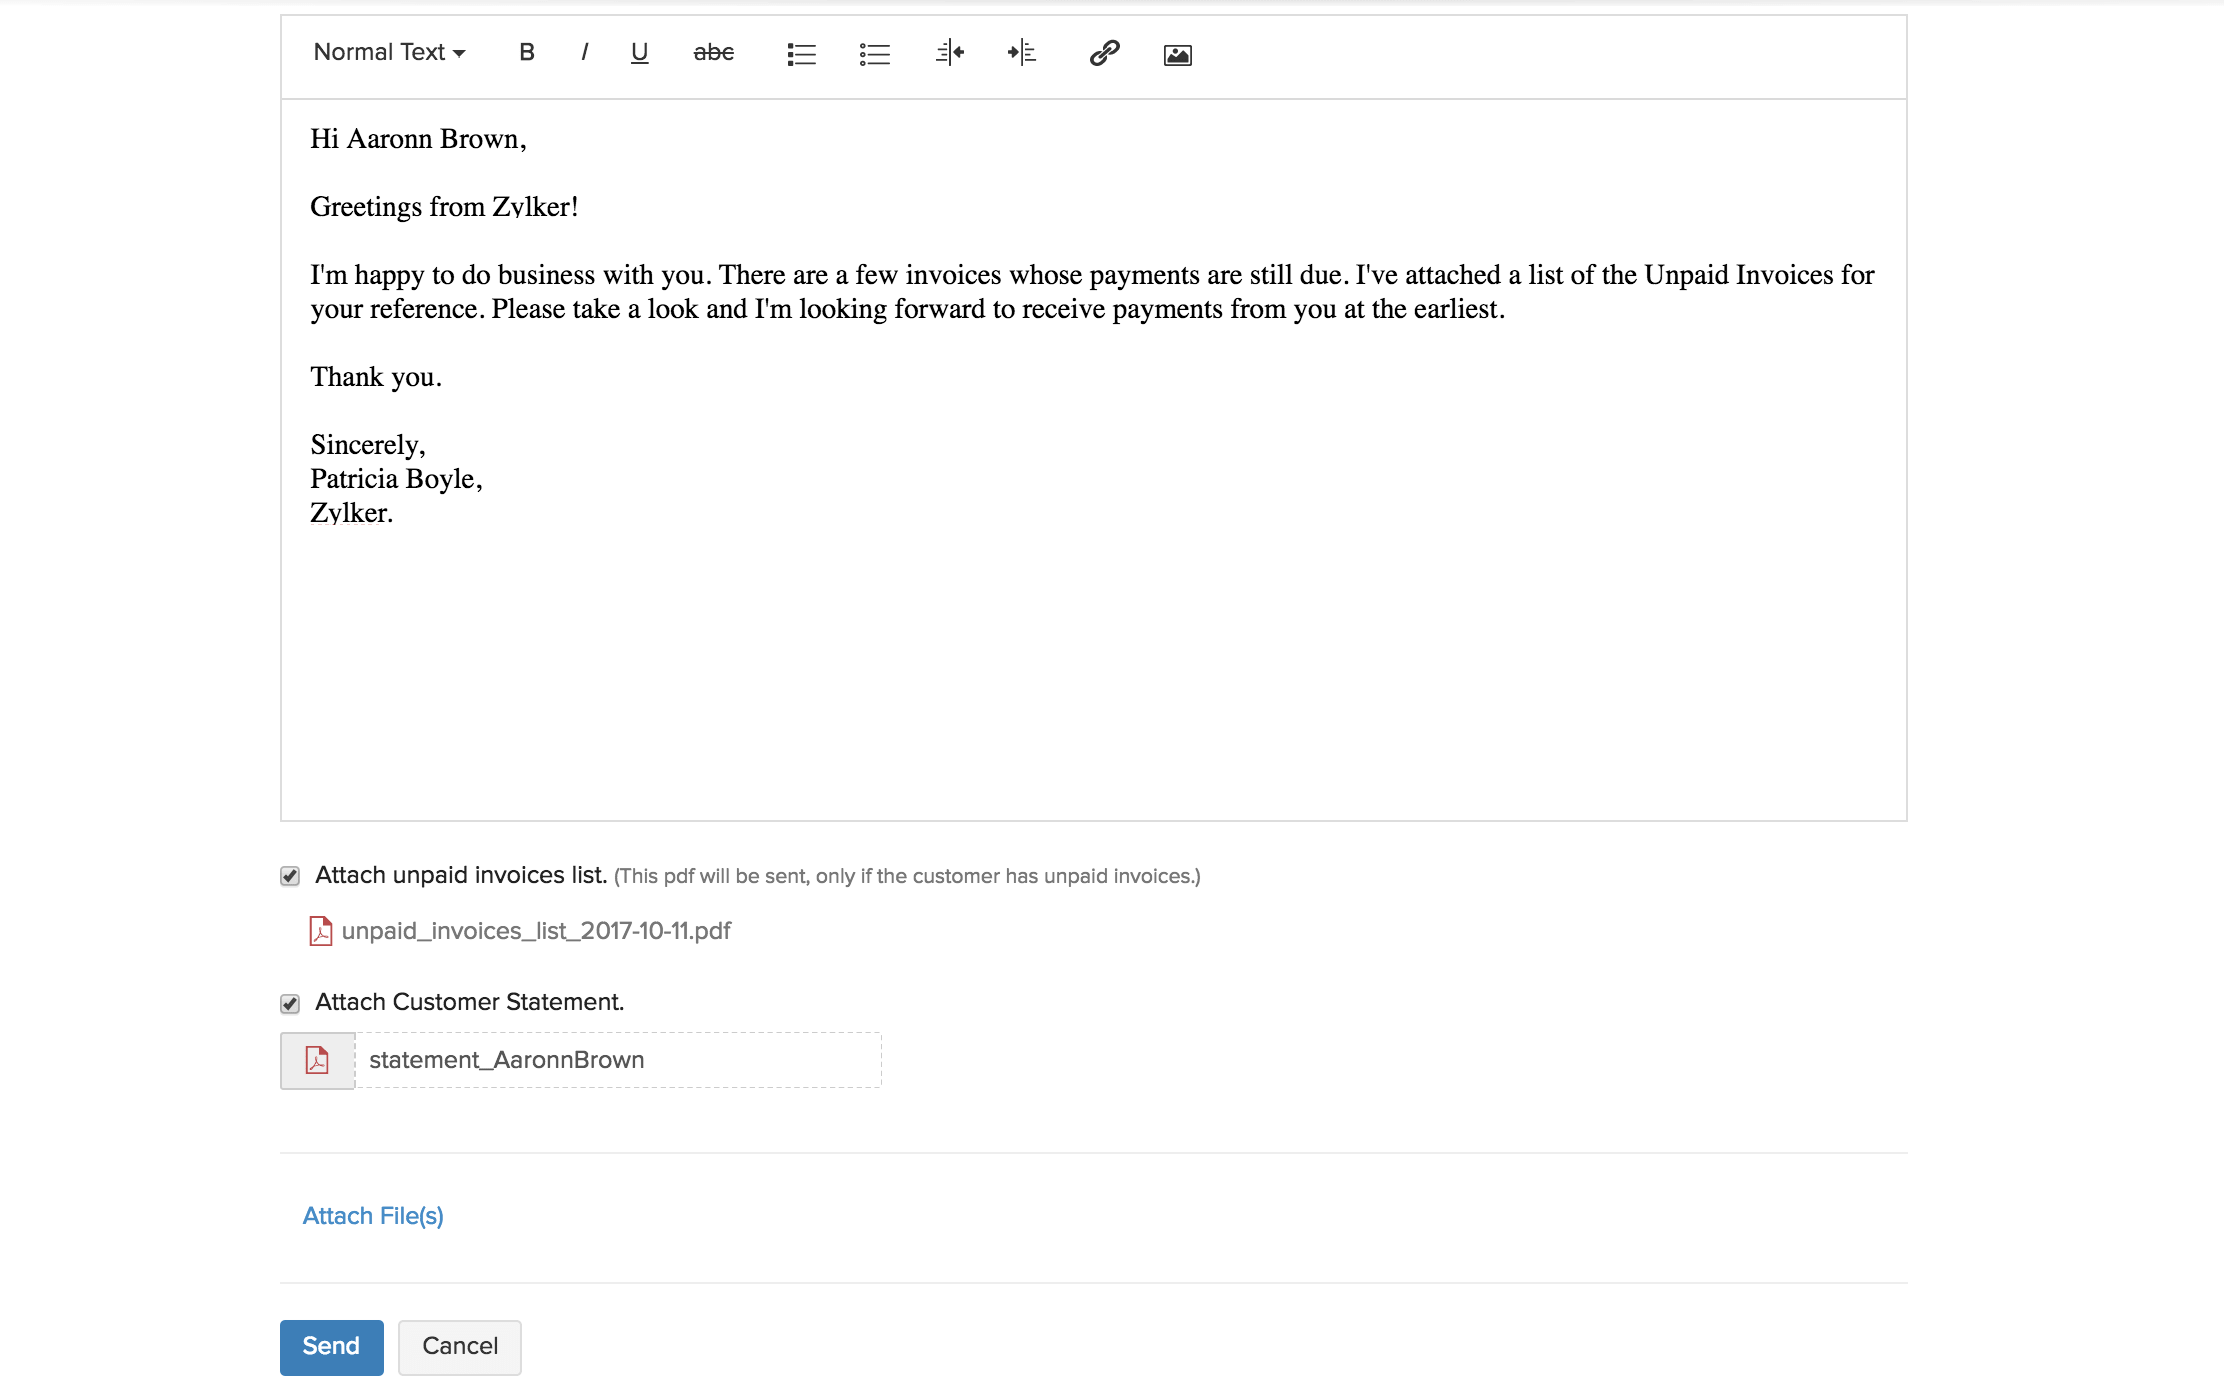 Sending email to a contact